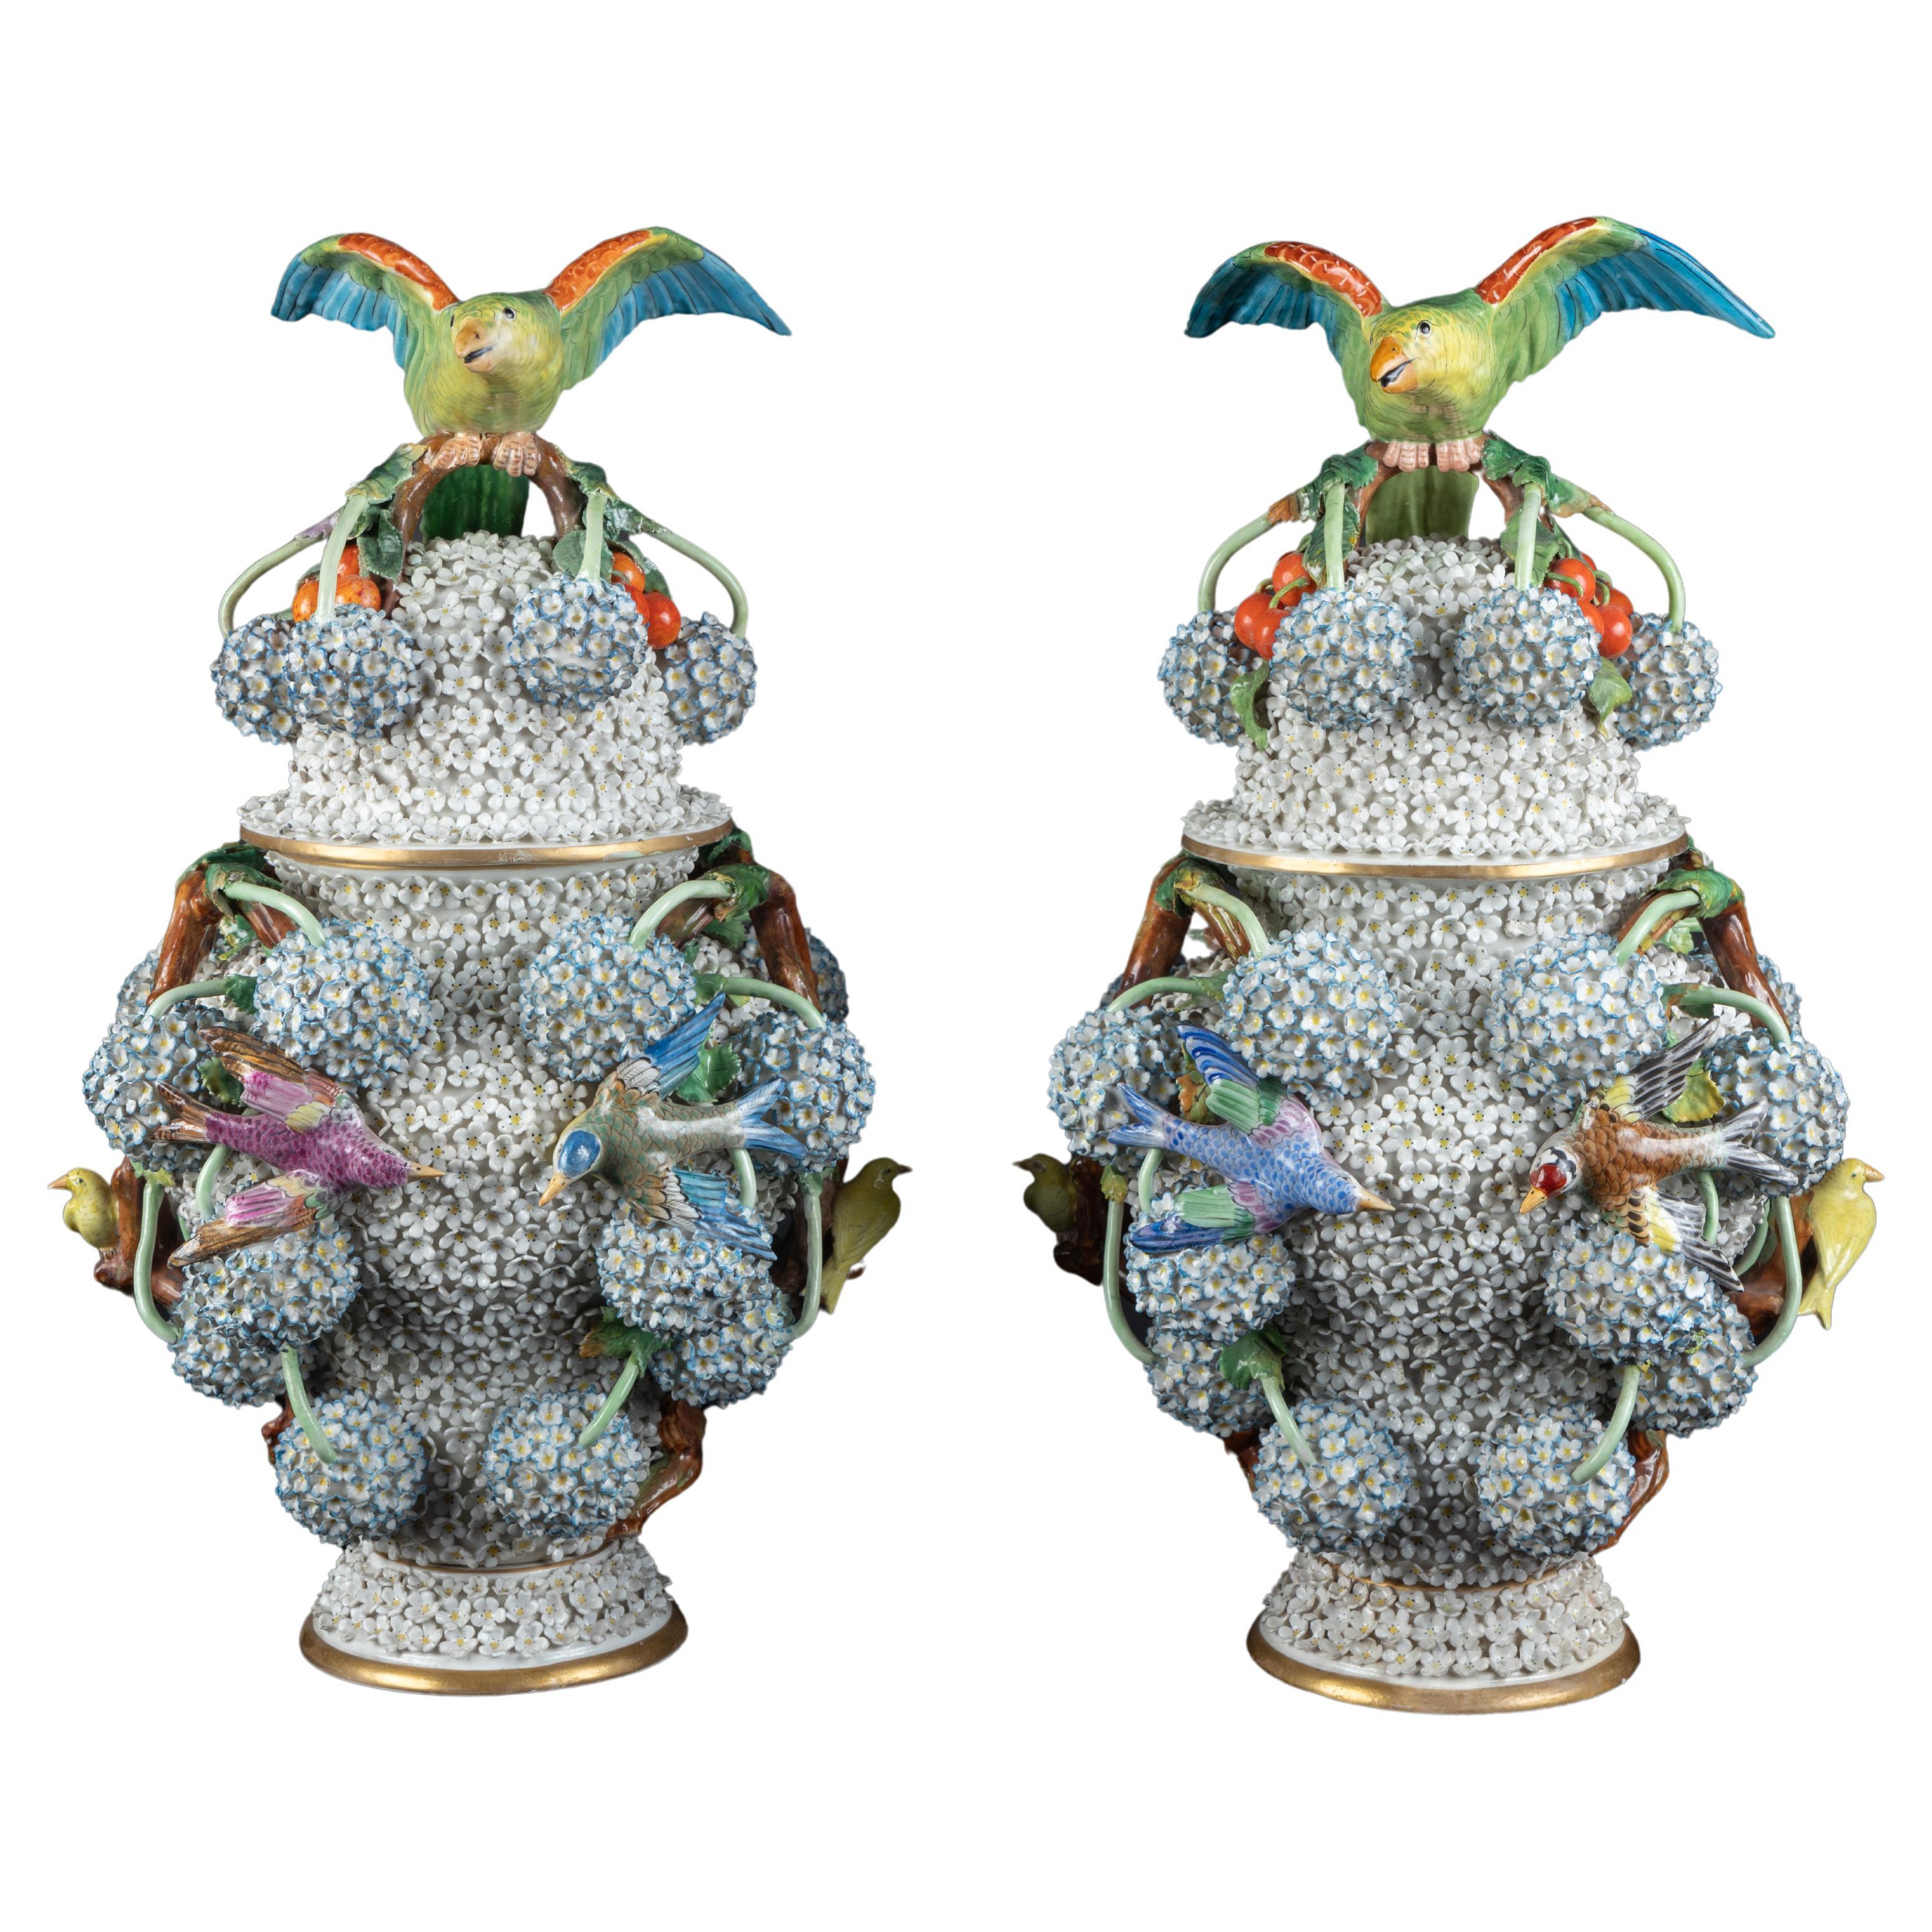 Magnificent Pair of Meissen Snowball Porcelain Covered Vases, Marked